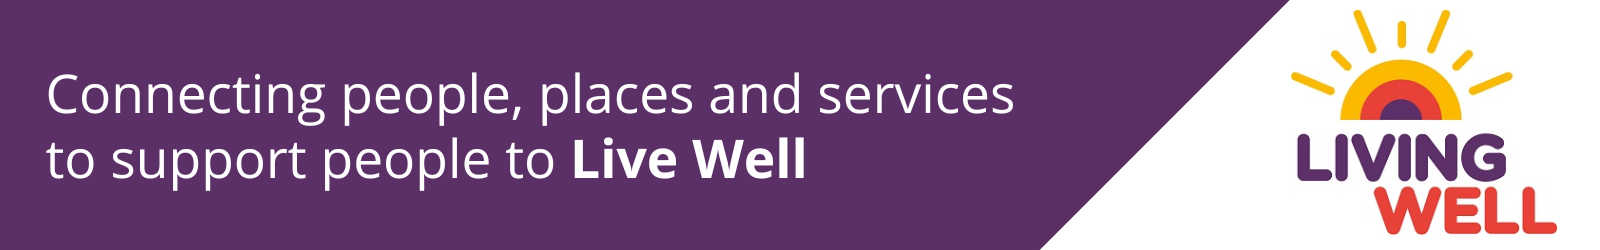 Connecting people, places and services to support people to Live Well